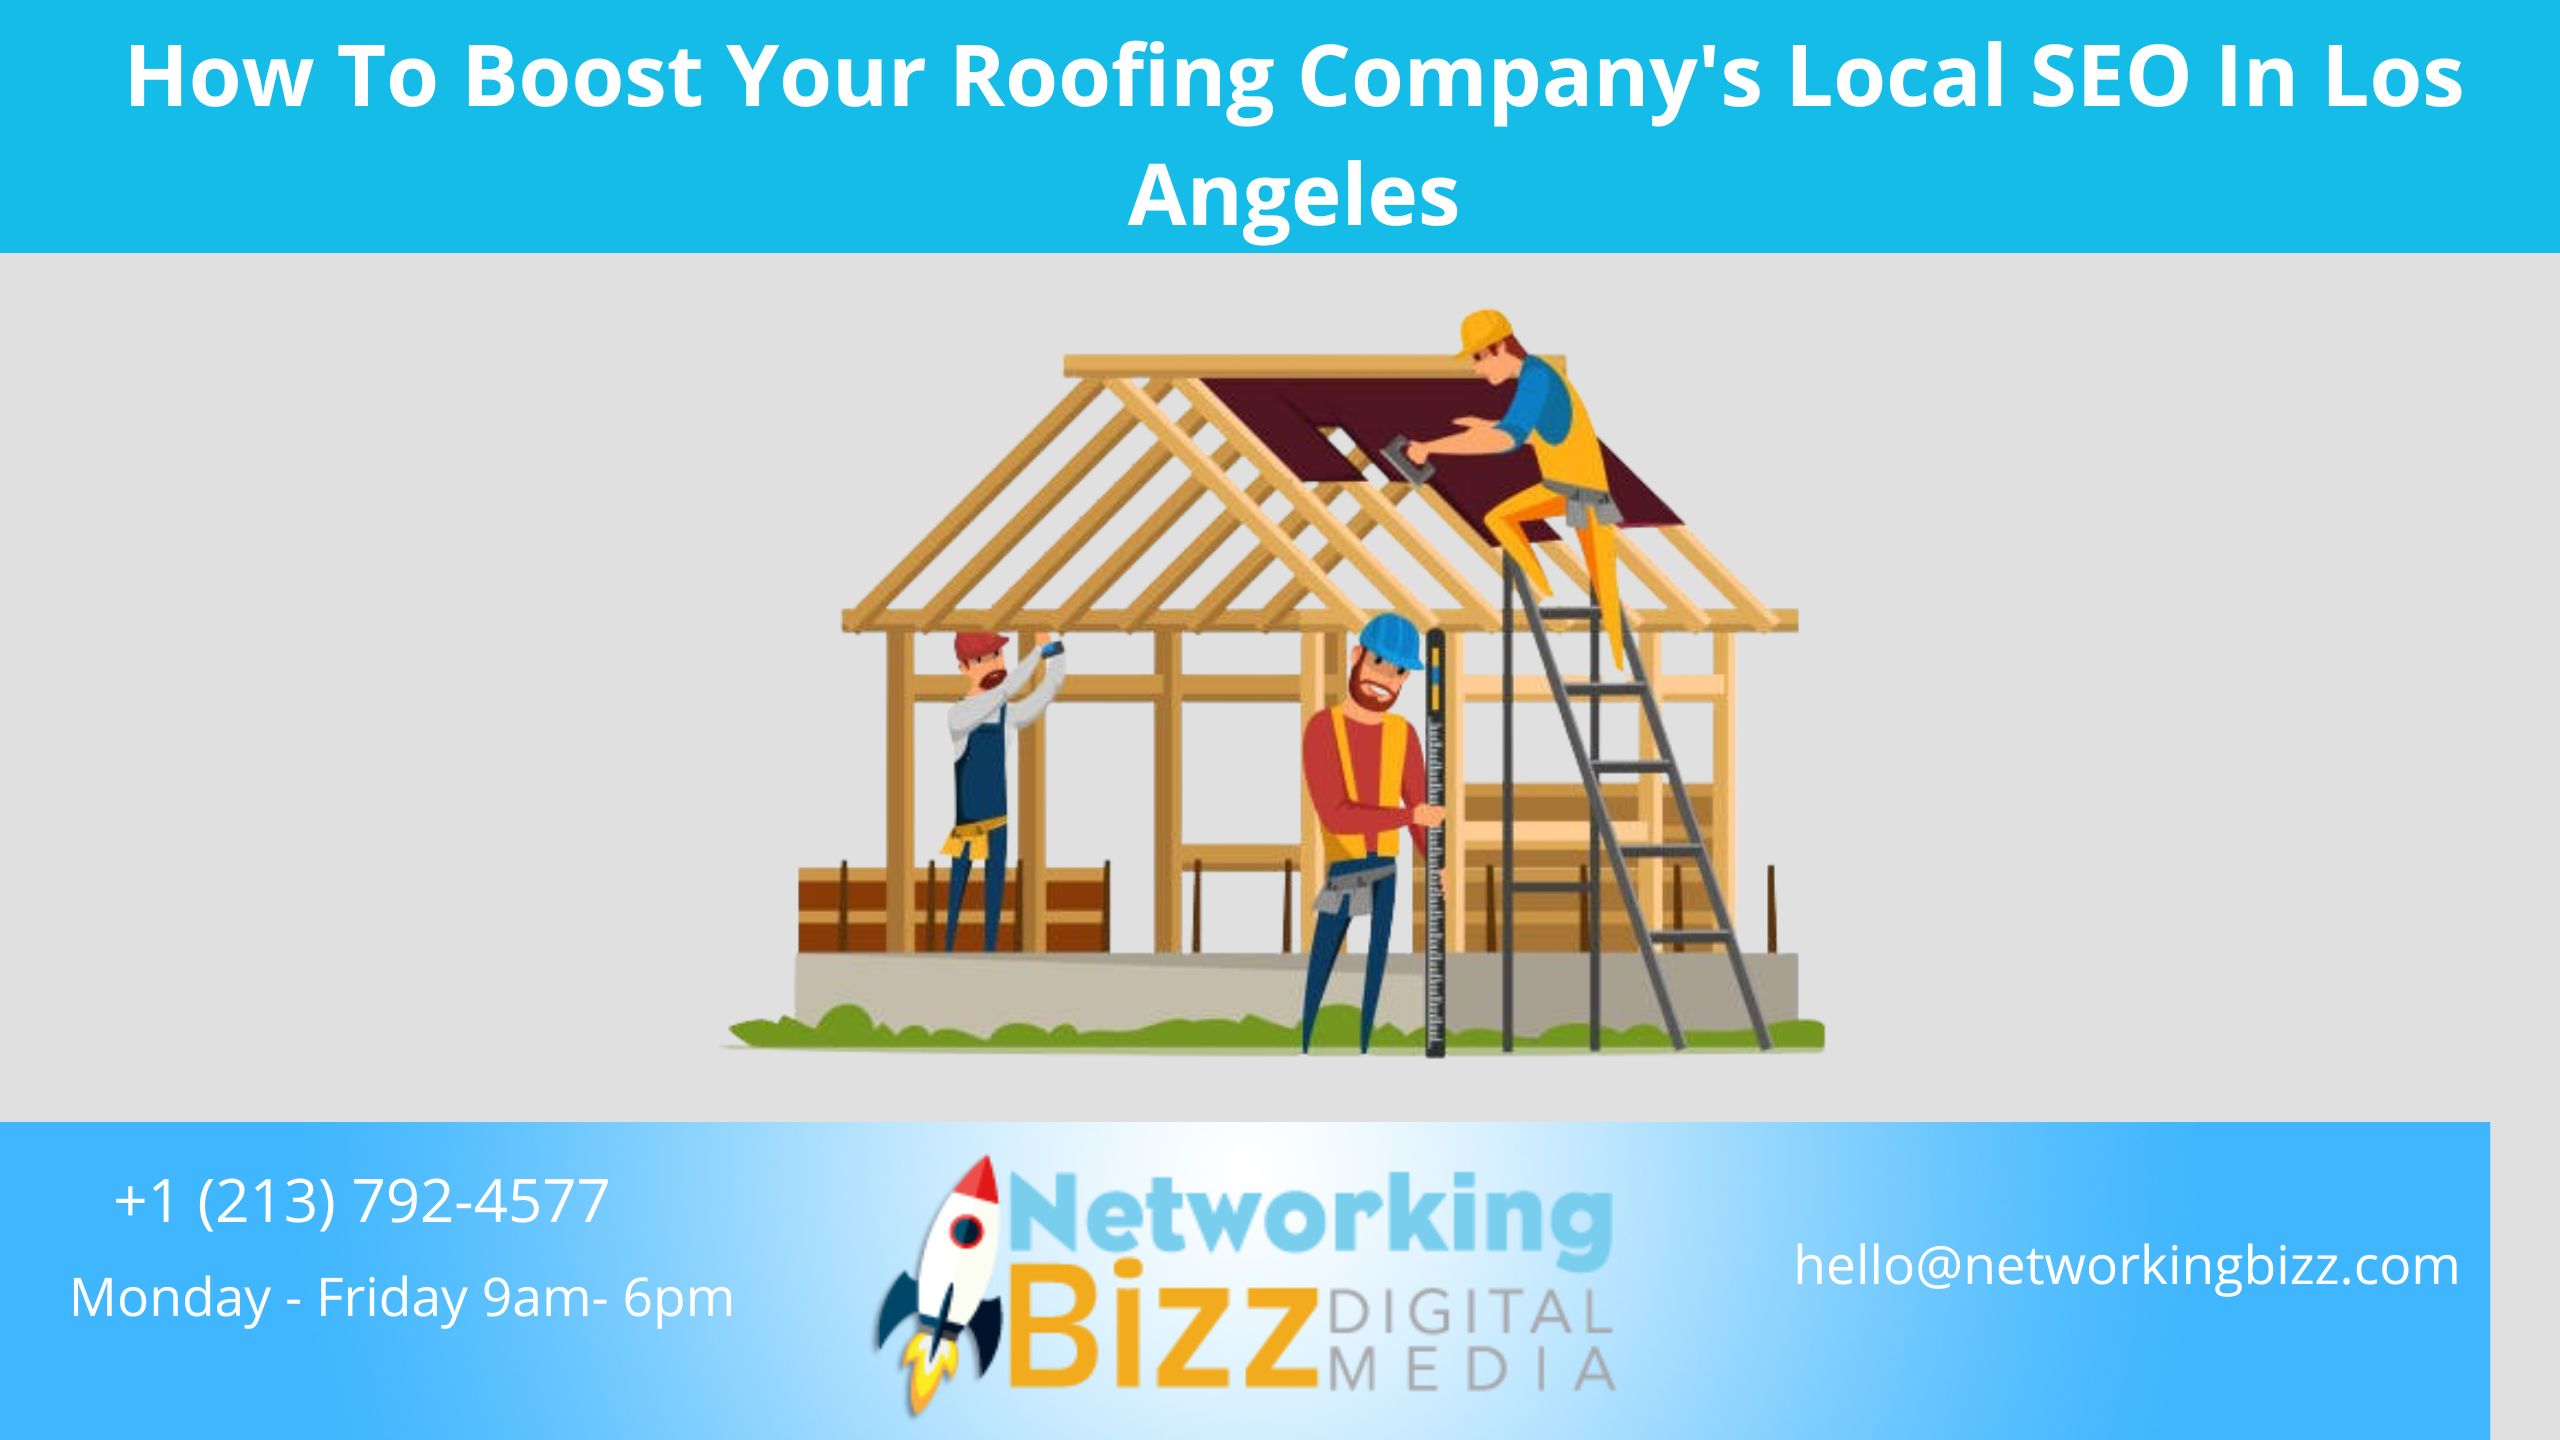 How To Boost Your Roofing Company’s Local SEO In Los Angeles 